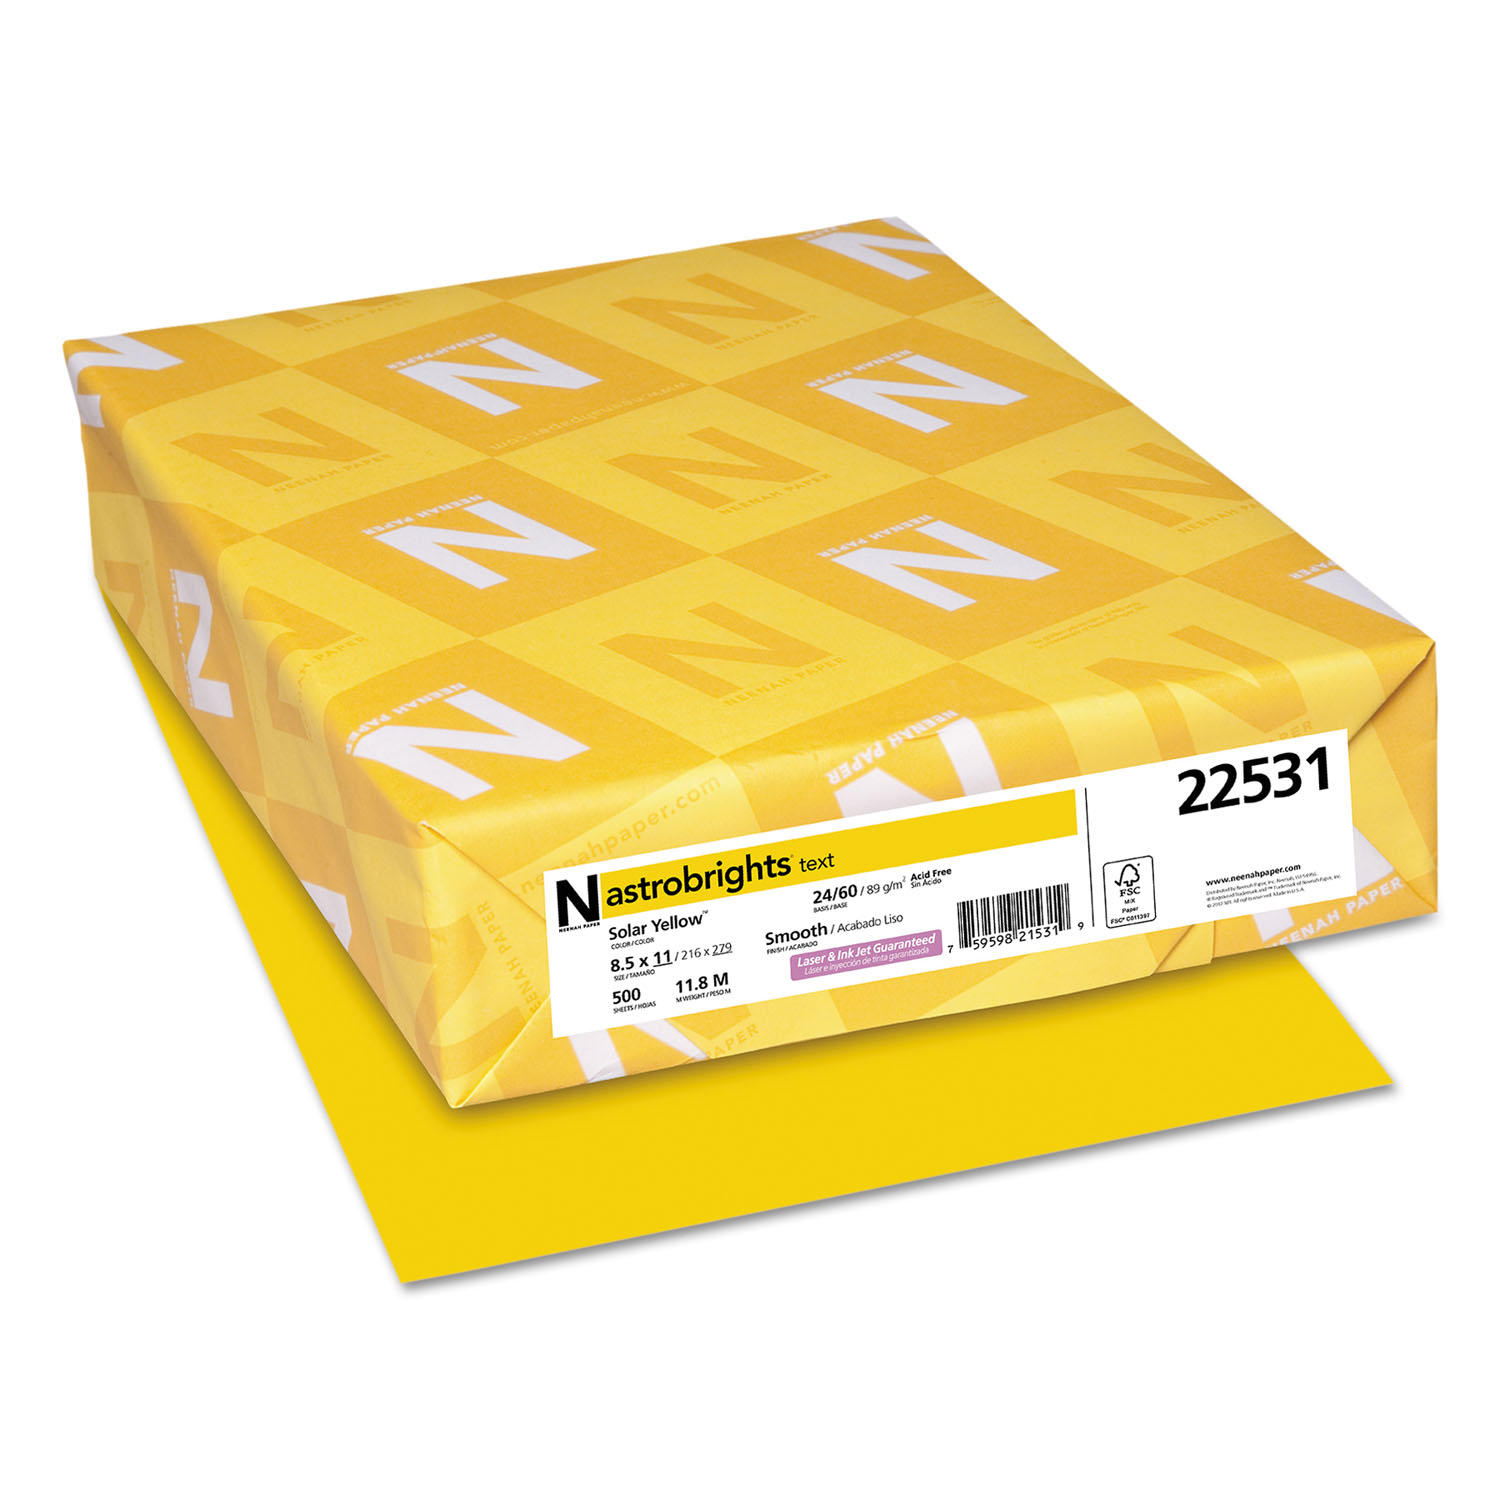 Astrobrights Color Paper, 8.5' x 11', 24 lb/89 gsm, 500 Sheets, Solar Yellow